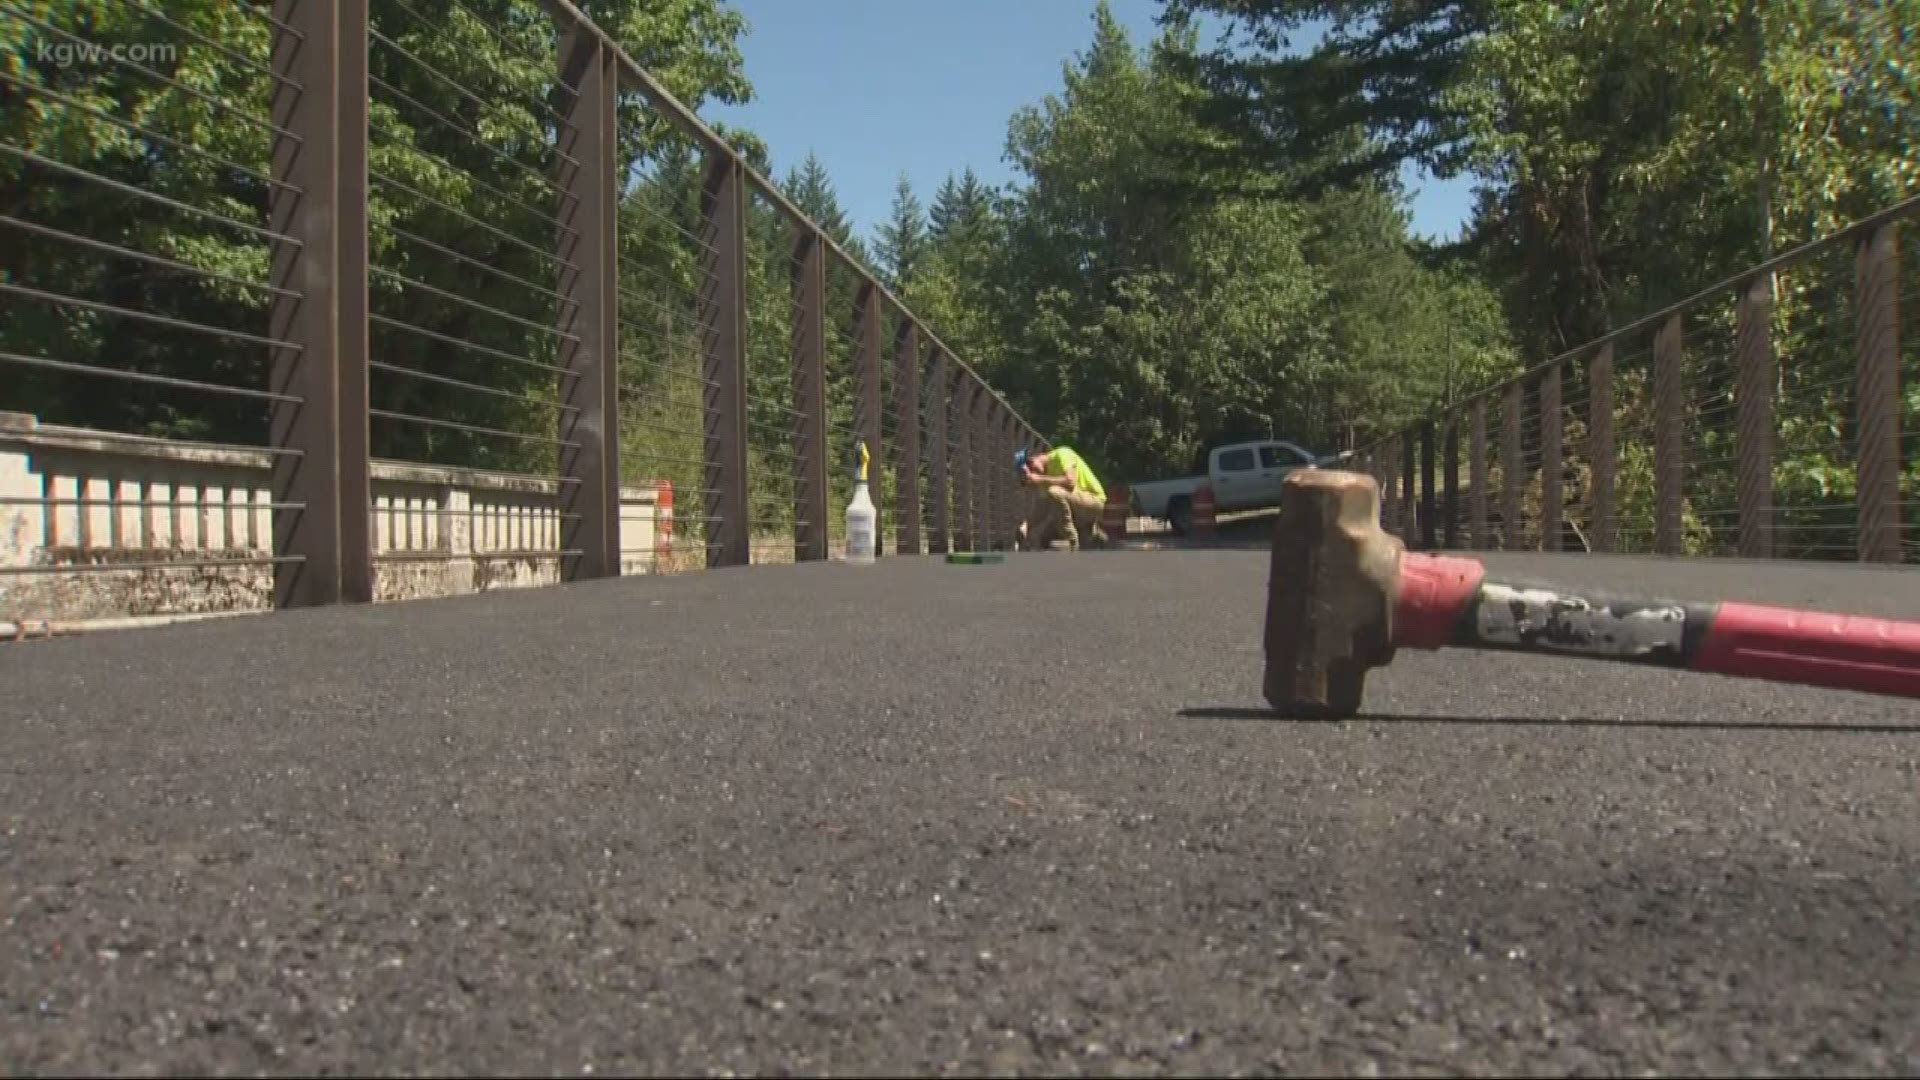 Walkers and bicyclists rejoice! A new bike and walking trail is about to open in the Columbia River Gorge.